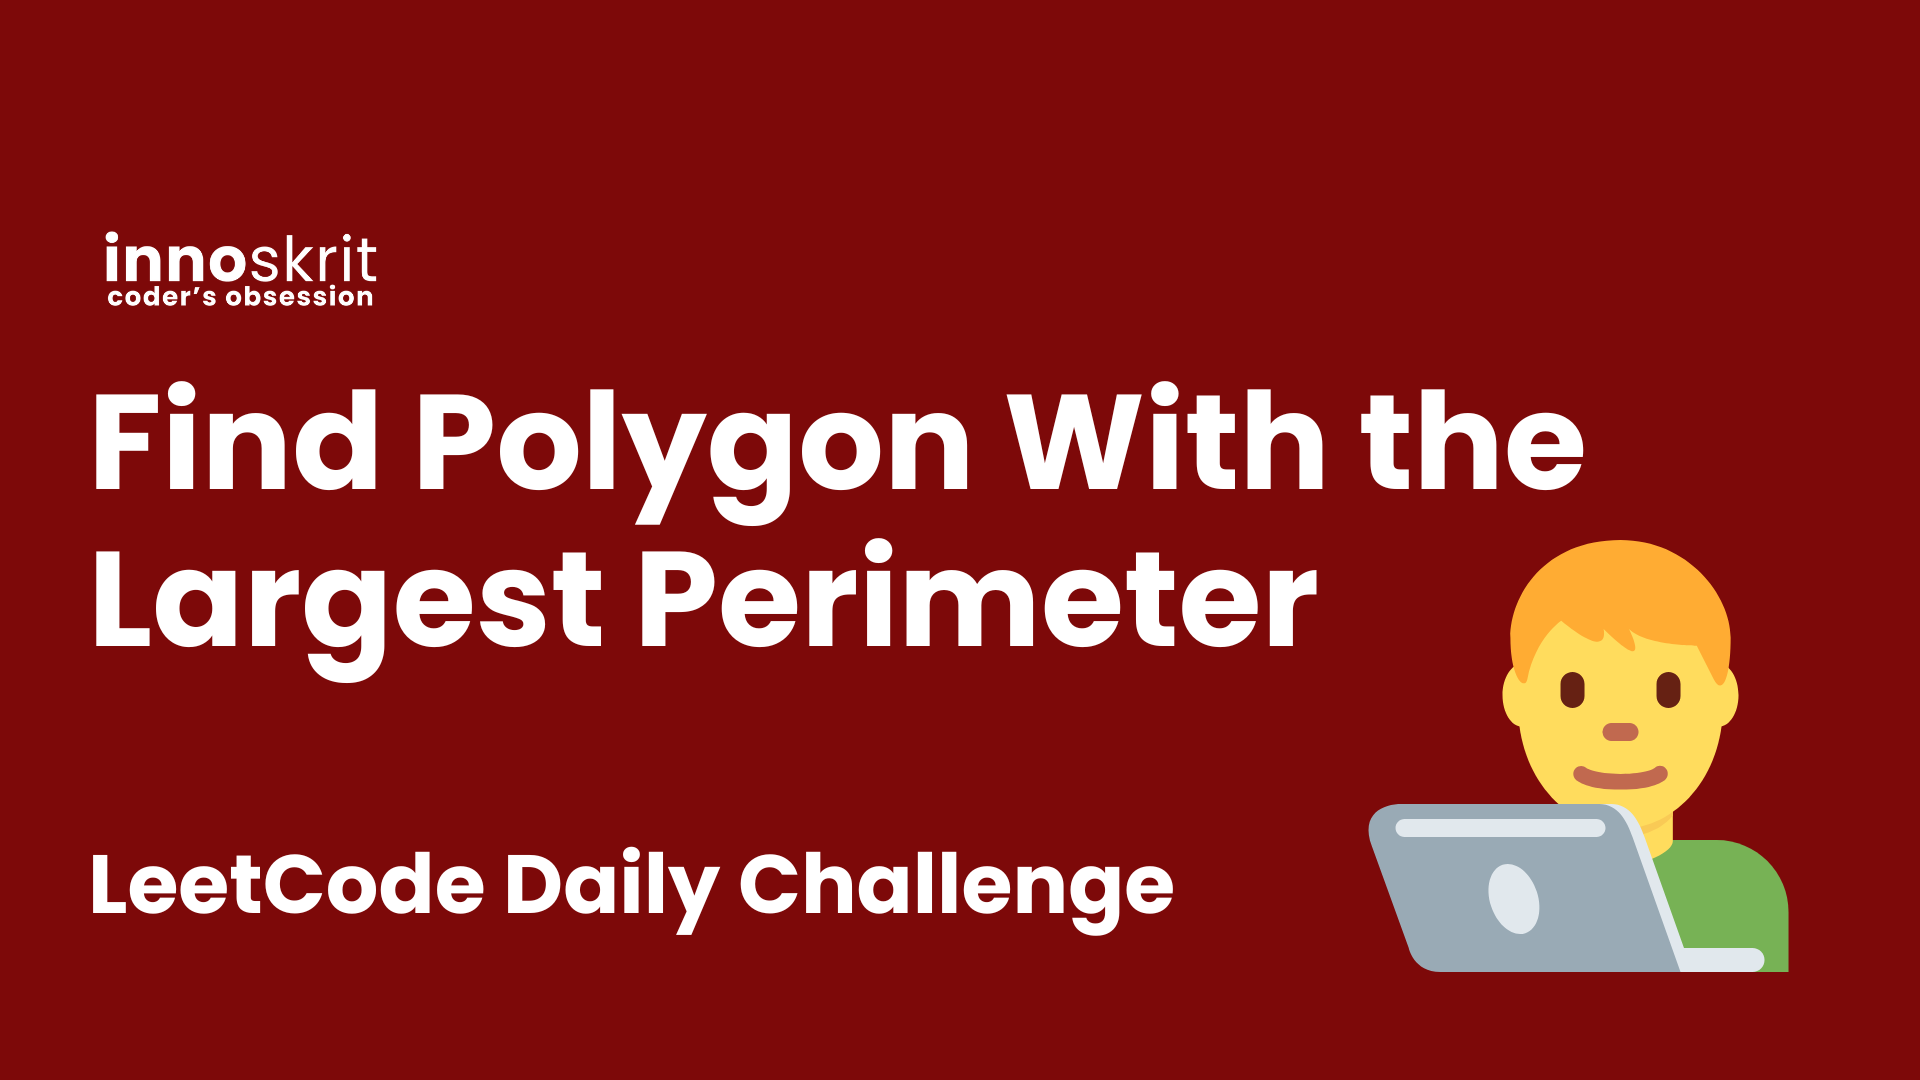 Find Polygon With the Largest Perimeter - LeetCode Daily Challenge